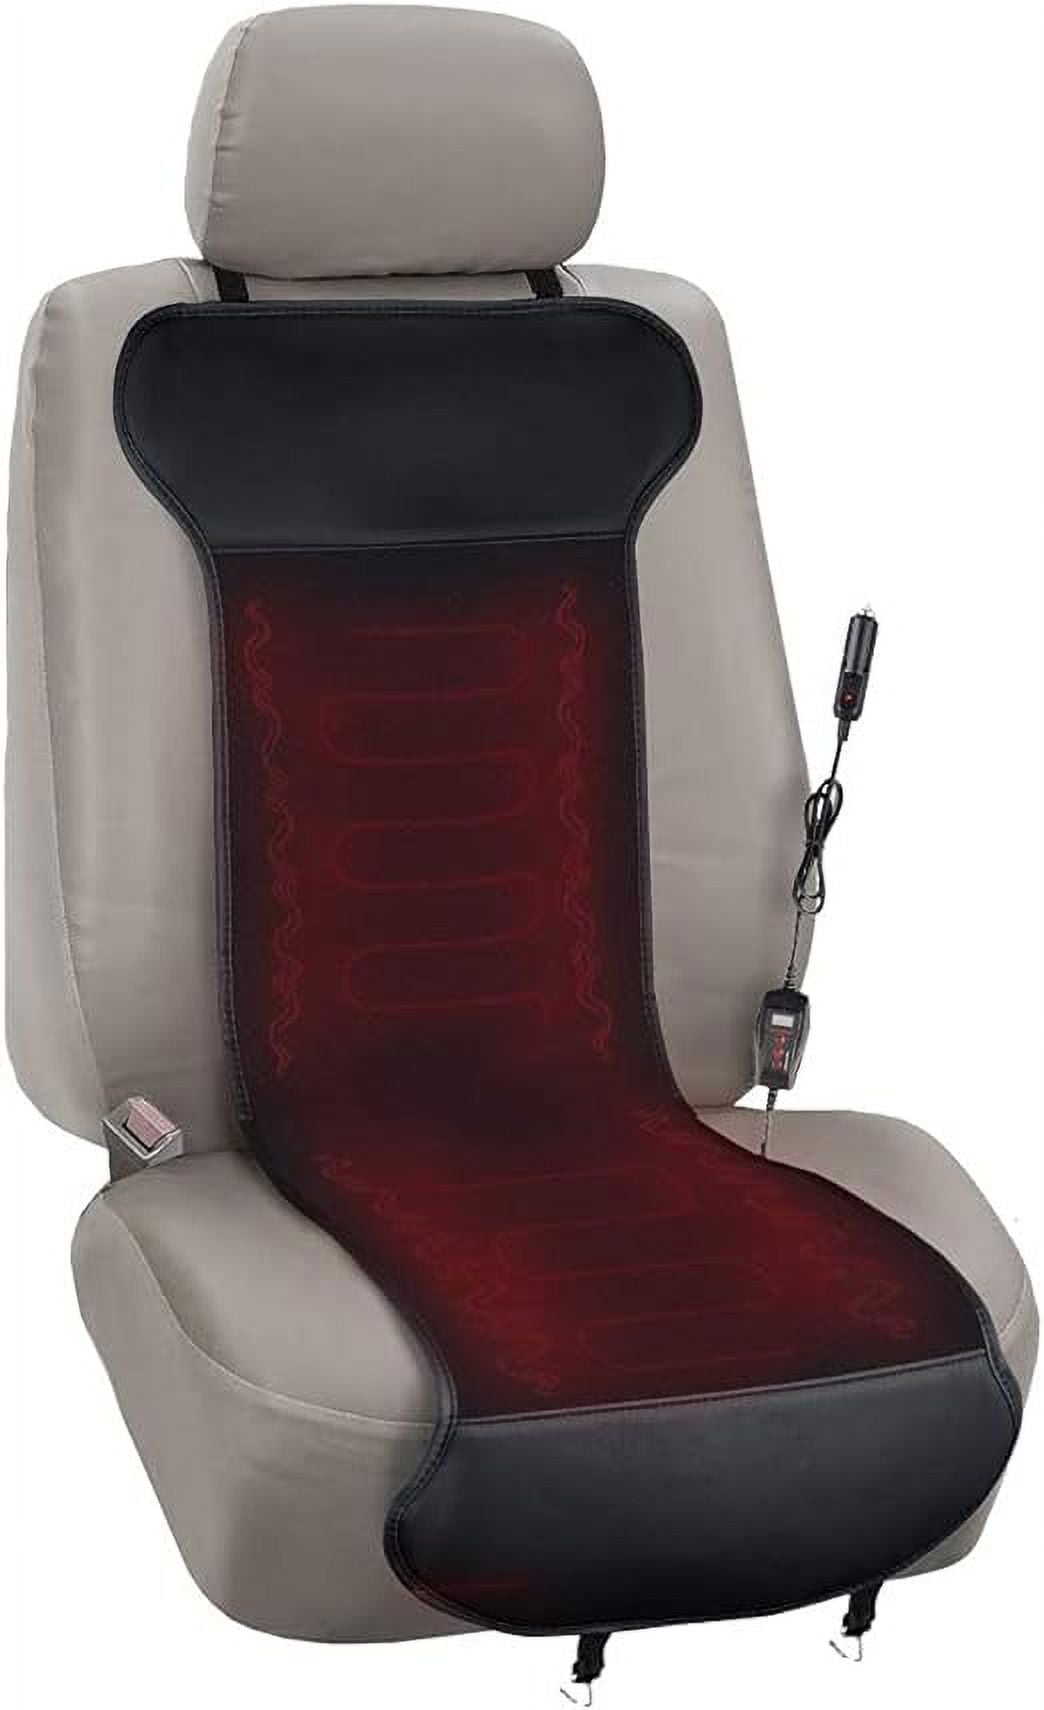 WTEMPO Car Heating Seat Cushion Car Winter Seat Electric Heating